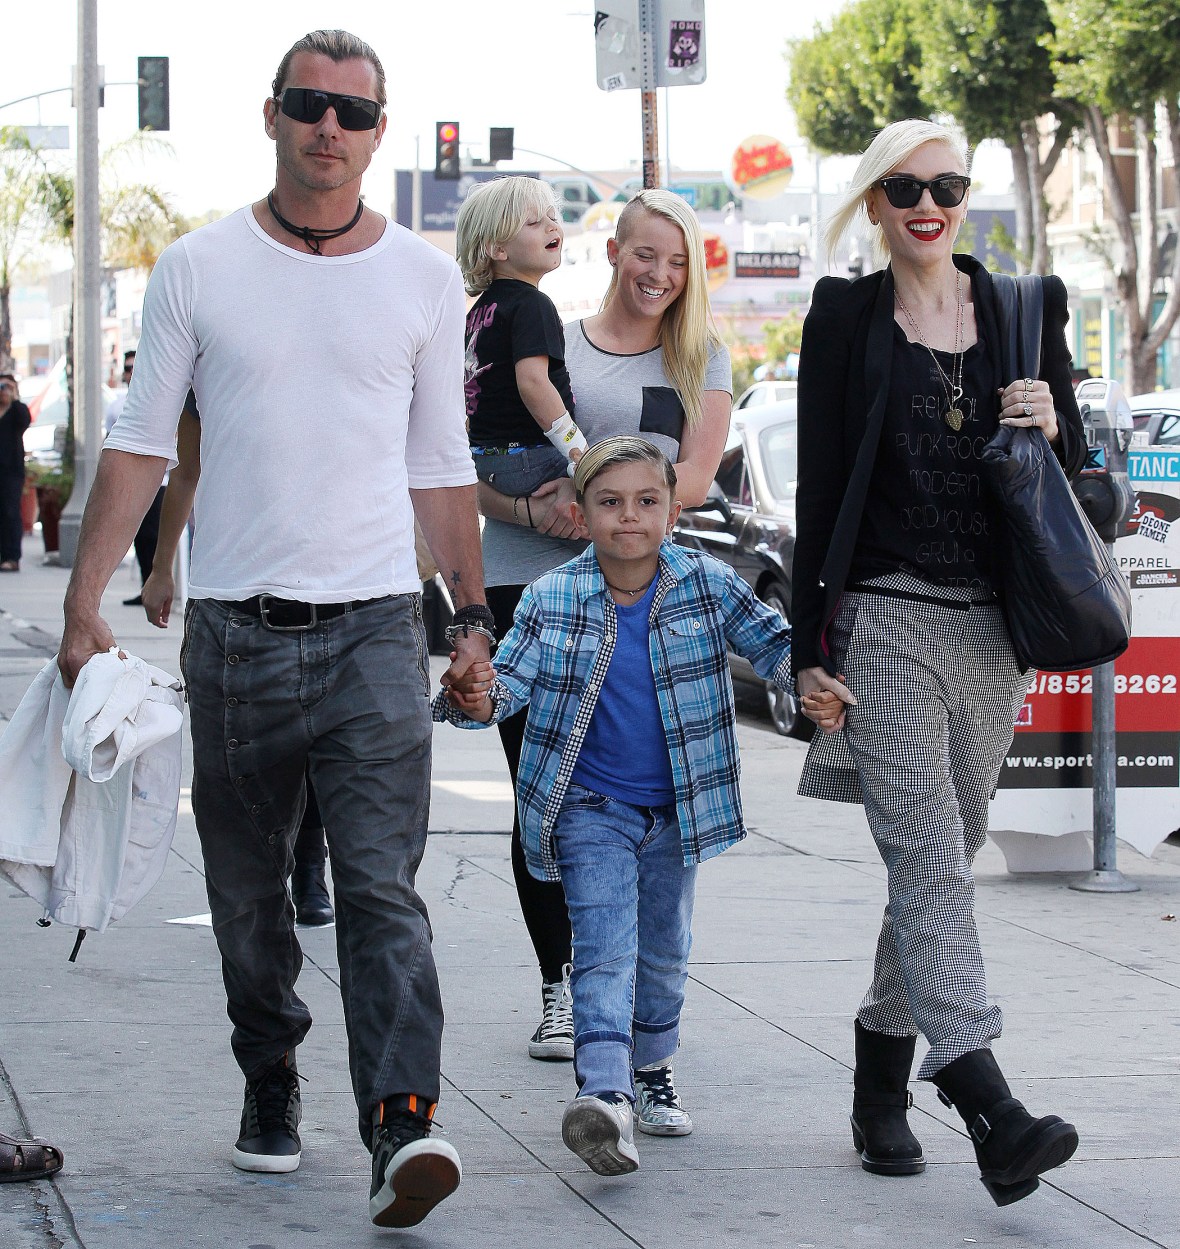 Gavin Rossdale's Alleged Mistress Mindy Mann Steps Out With Her Baby